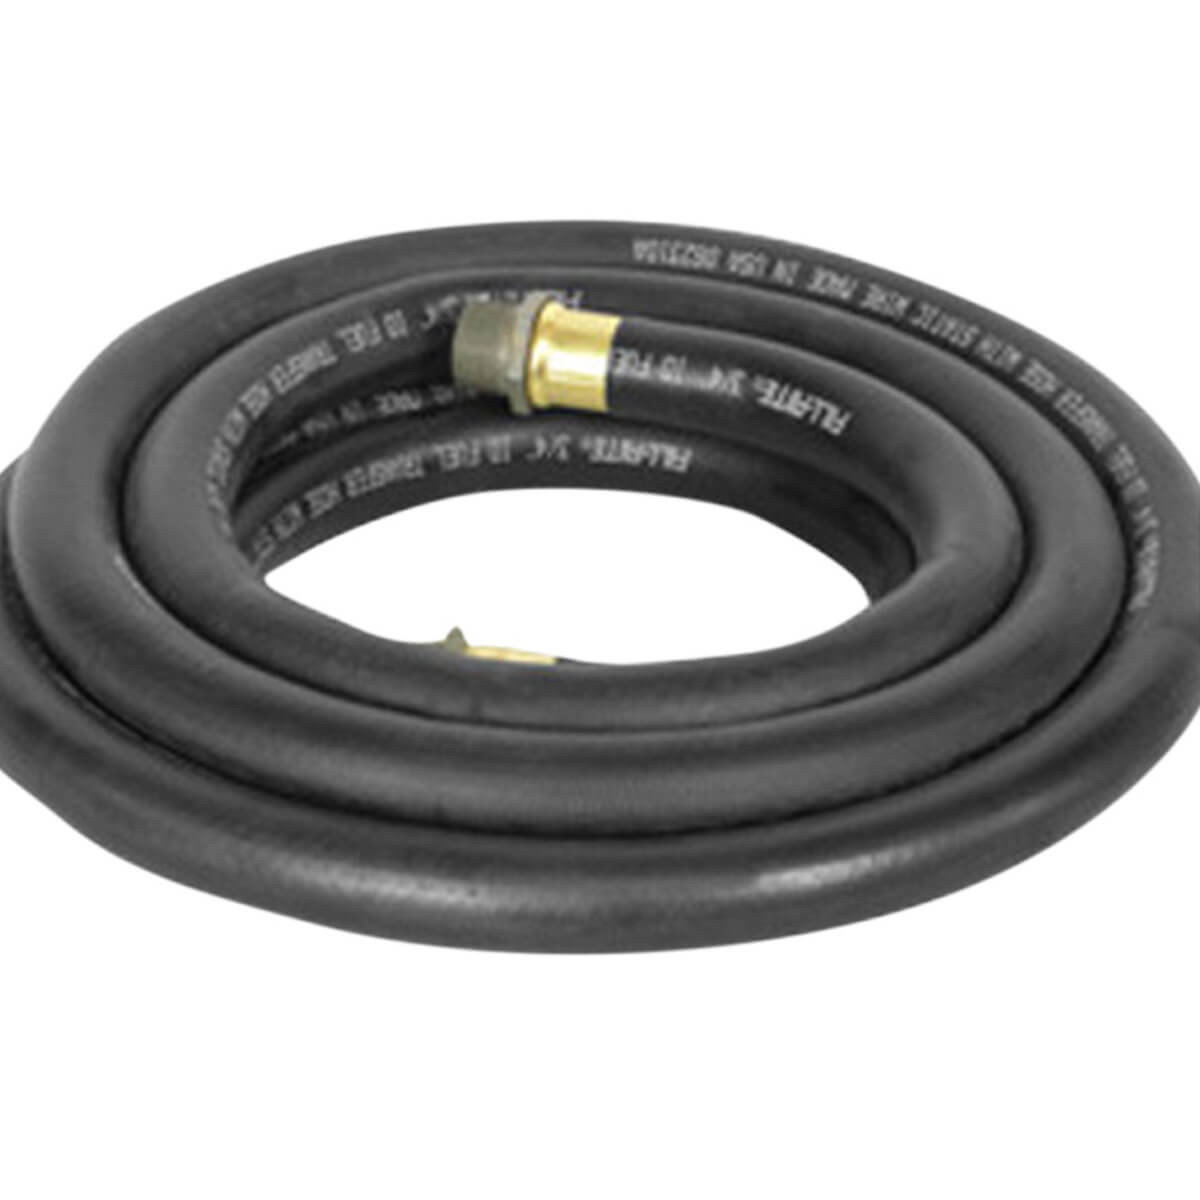 Fill-Rite Retail Hose - 3/4-in x 14-ft